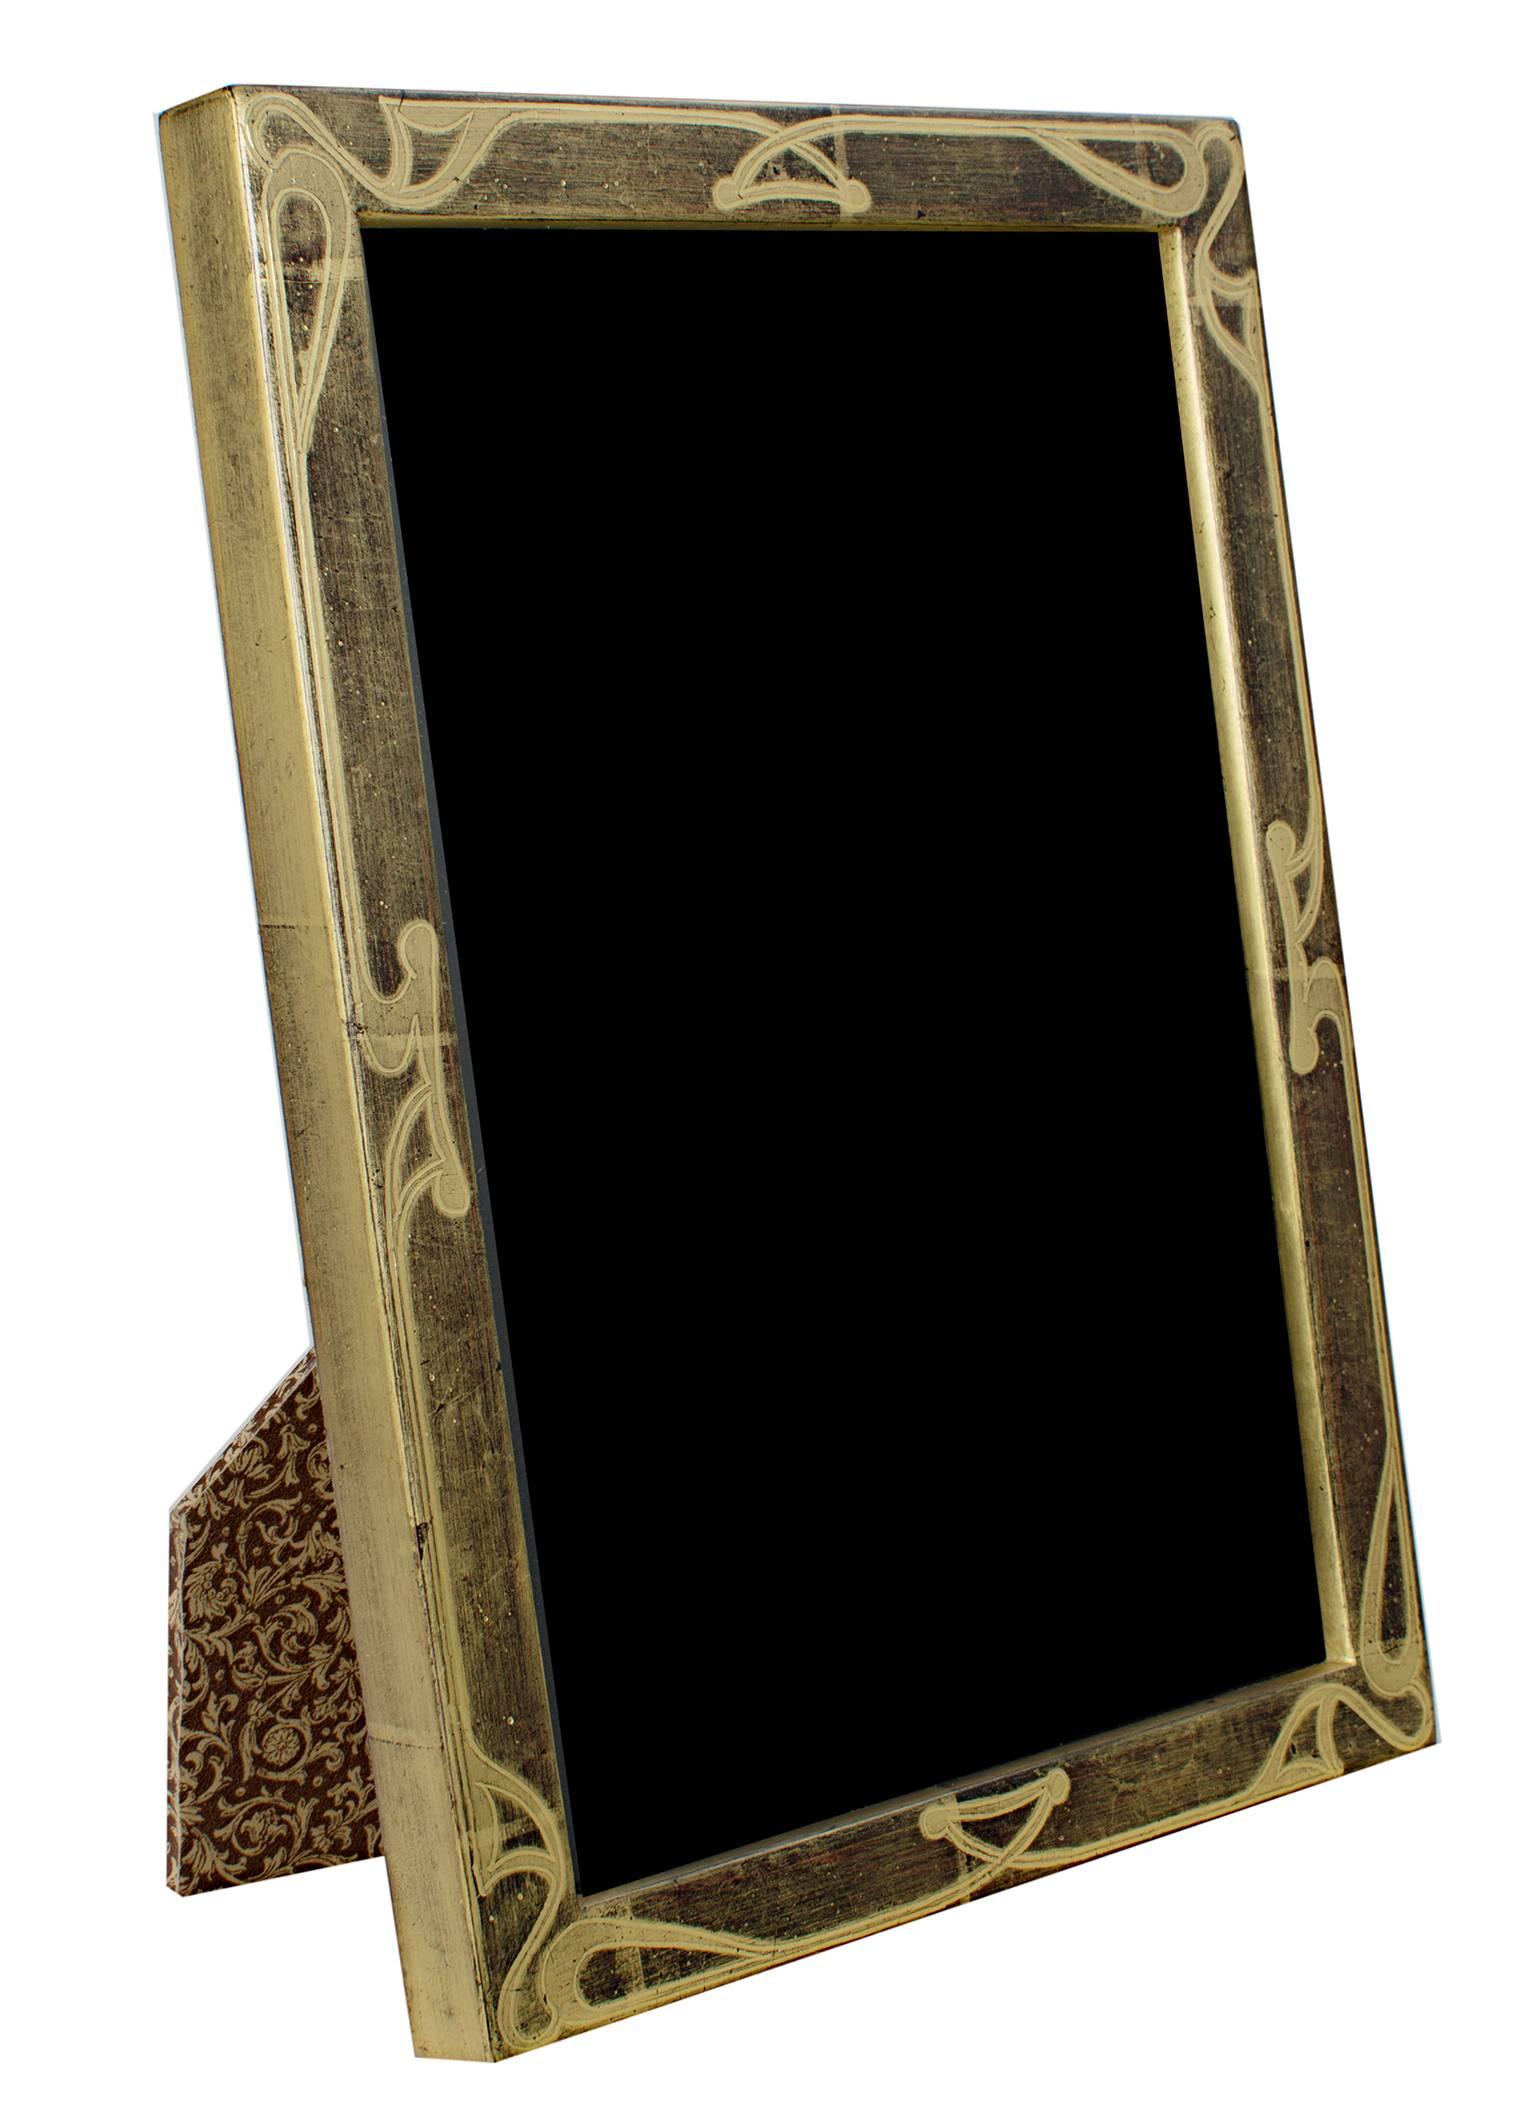 "Handmade 22K Gold Leaf Photo Frame, " Wood 5 x 7 in Frame created in Romania - Art by Unknown